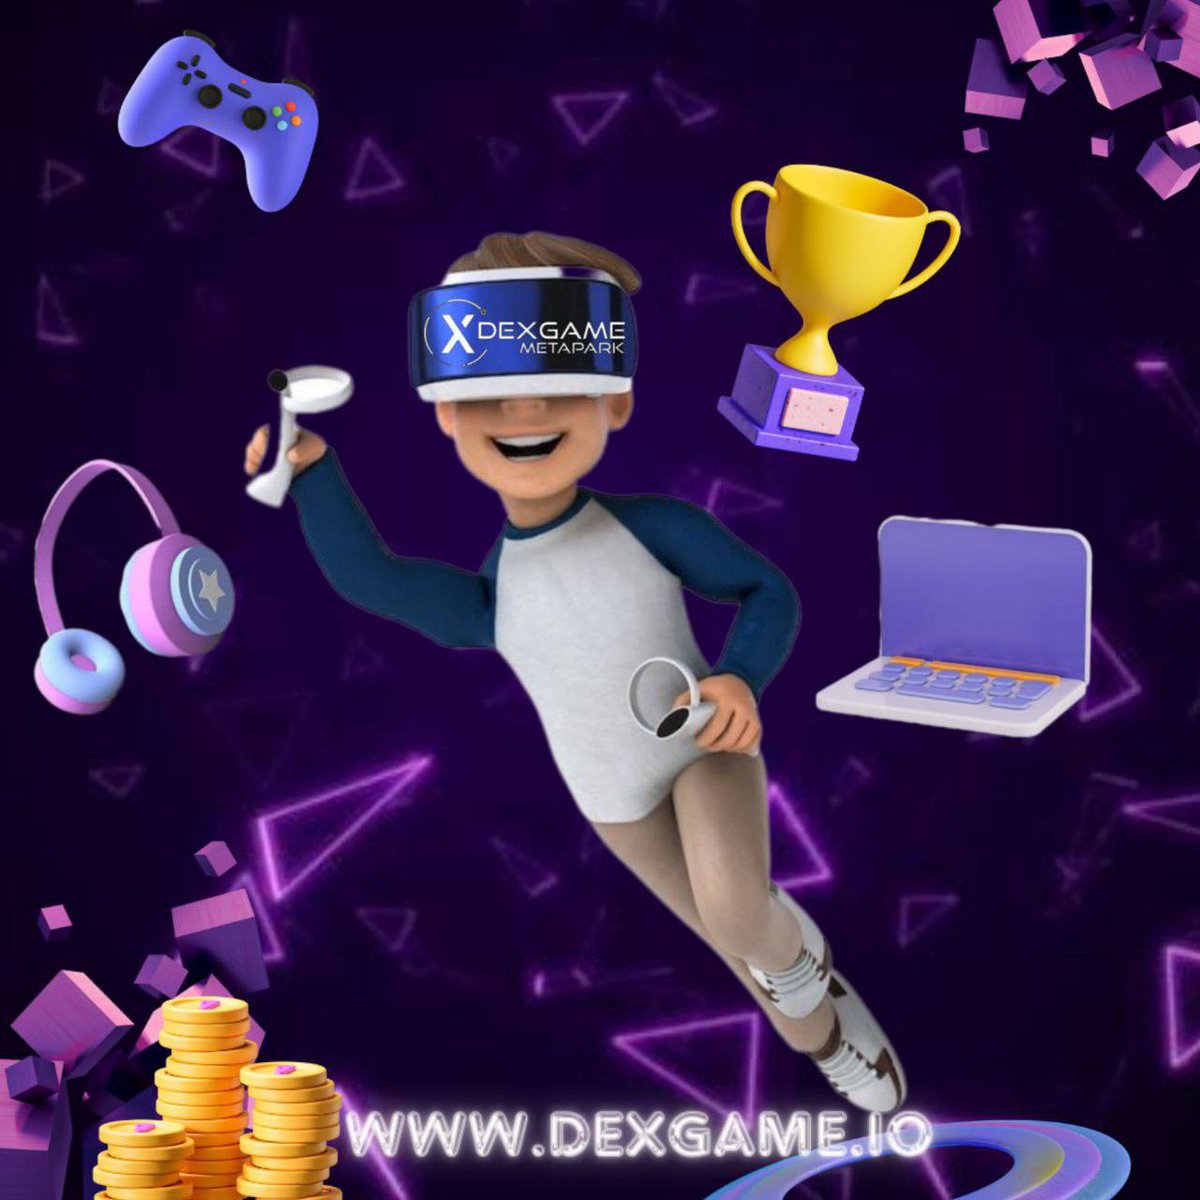 DEXGame provides an open and decentralized economy for its users.
#gem 🌟 #CryptoGaming 💥 #oxro 😉 #Web3 🙏 #DexGame 🤫 #dxgm ♥️ #crypto 🤠